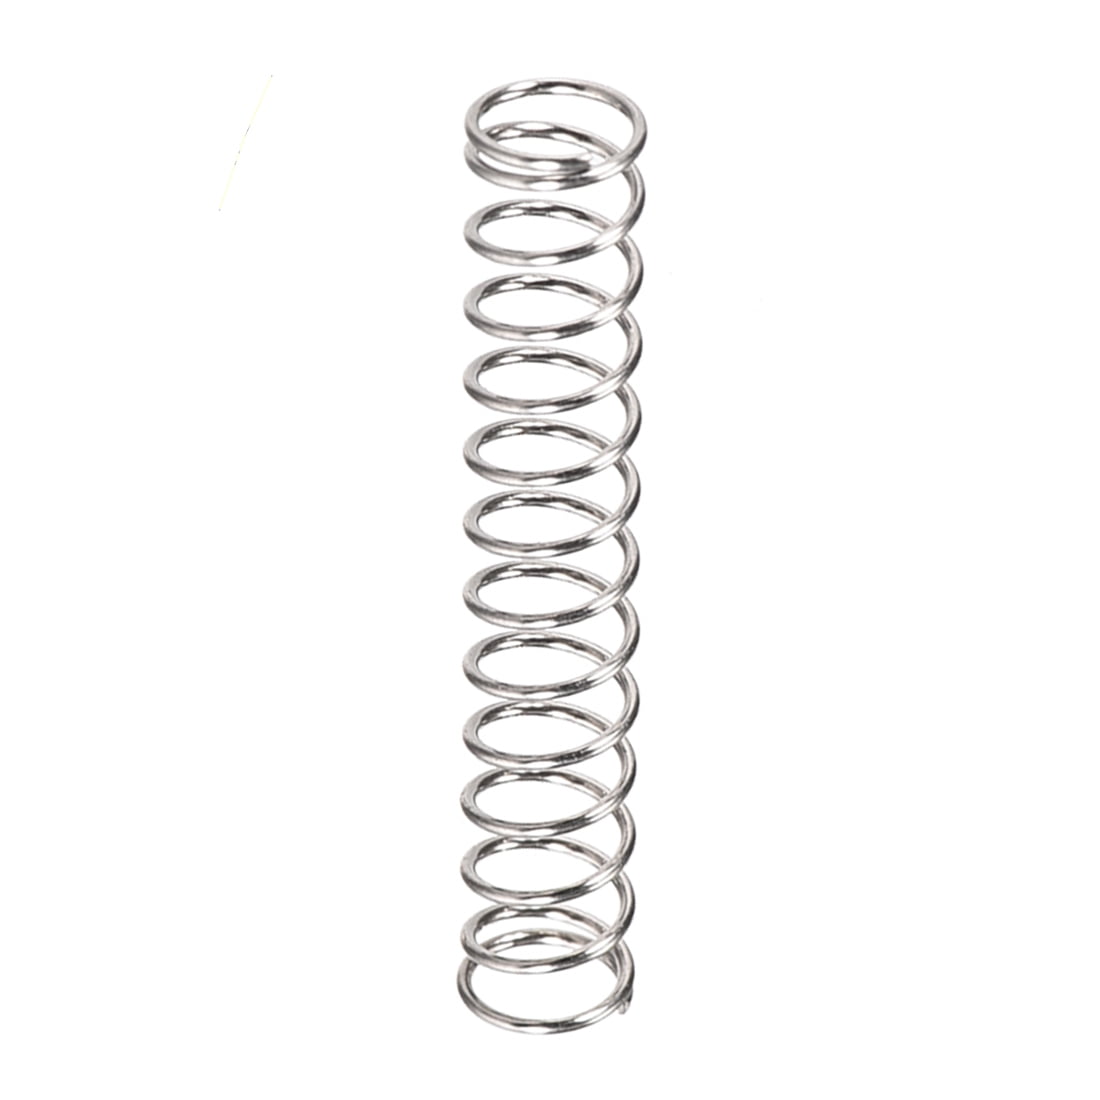 0.5mm WD 5mm OD Stainless Steel Tension Spring Stretched Extended Springs Good 